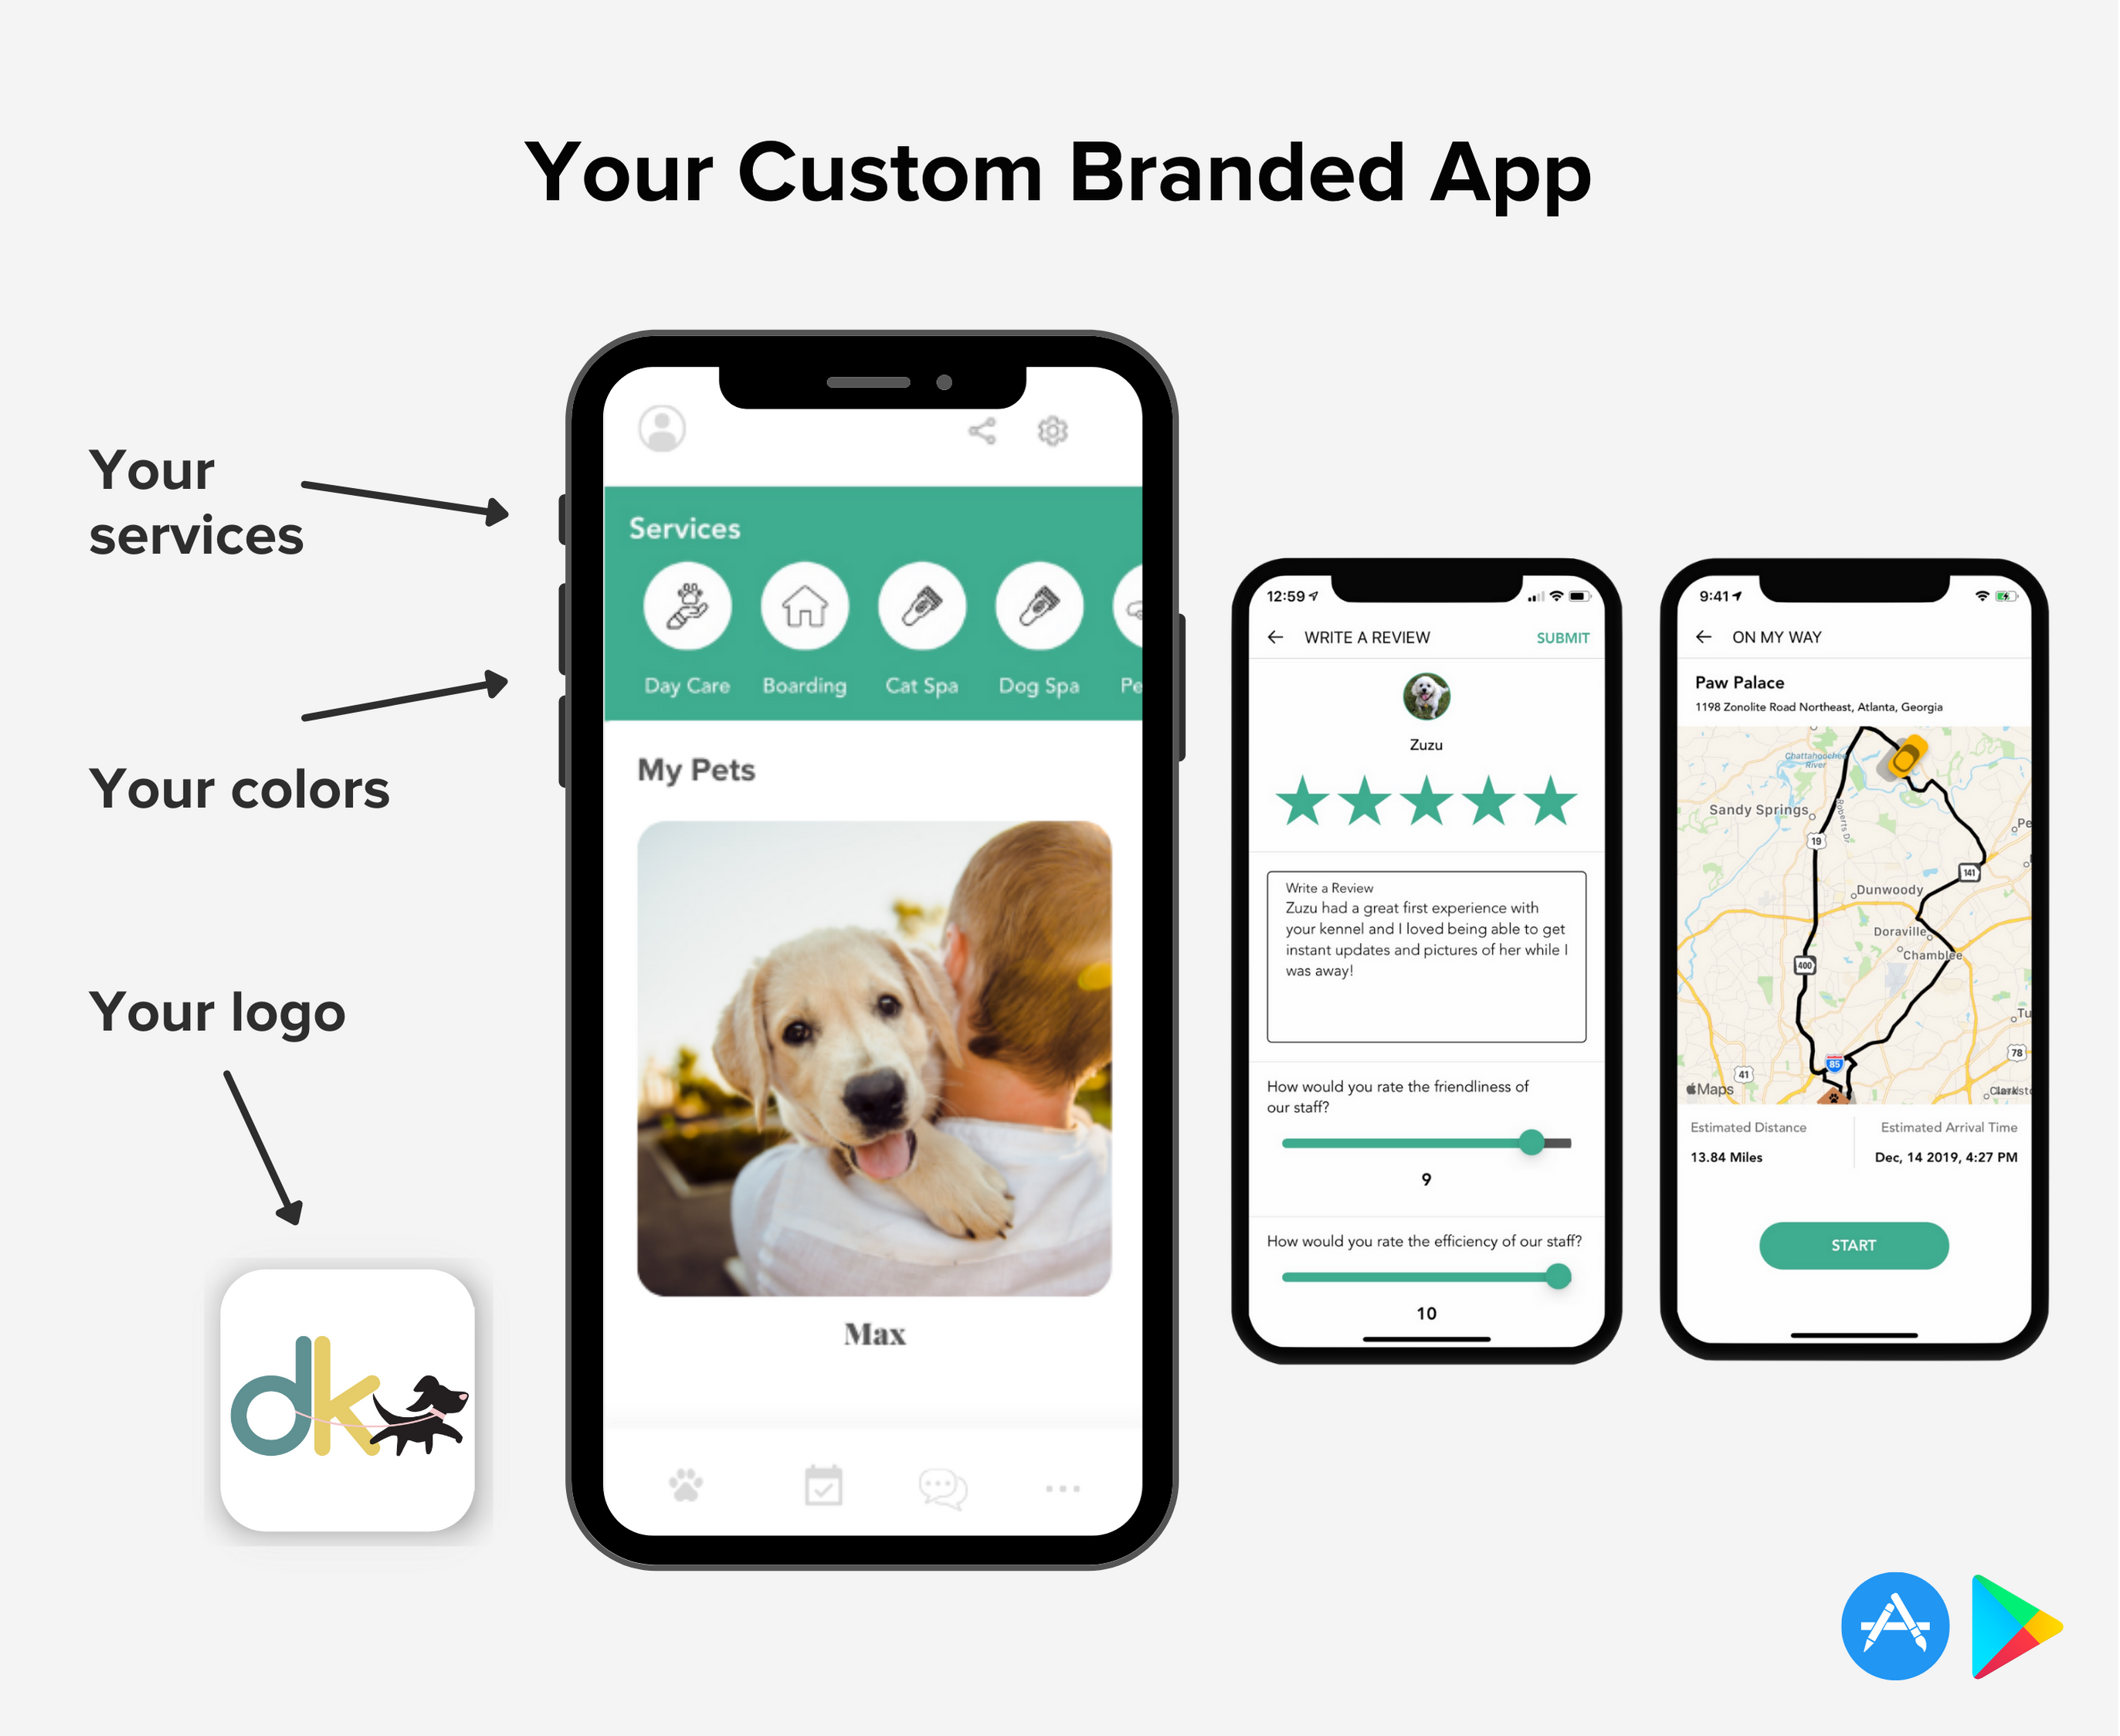 Give your customers your own custom branded mobile app so they can request appointments, send immunizations and feeding info, message back and forth, and much more.